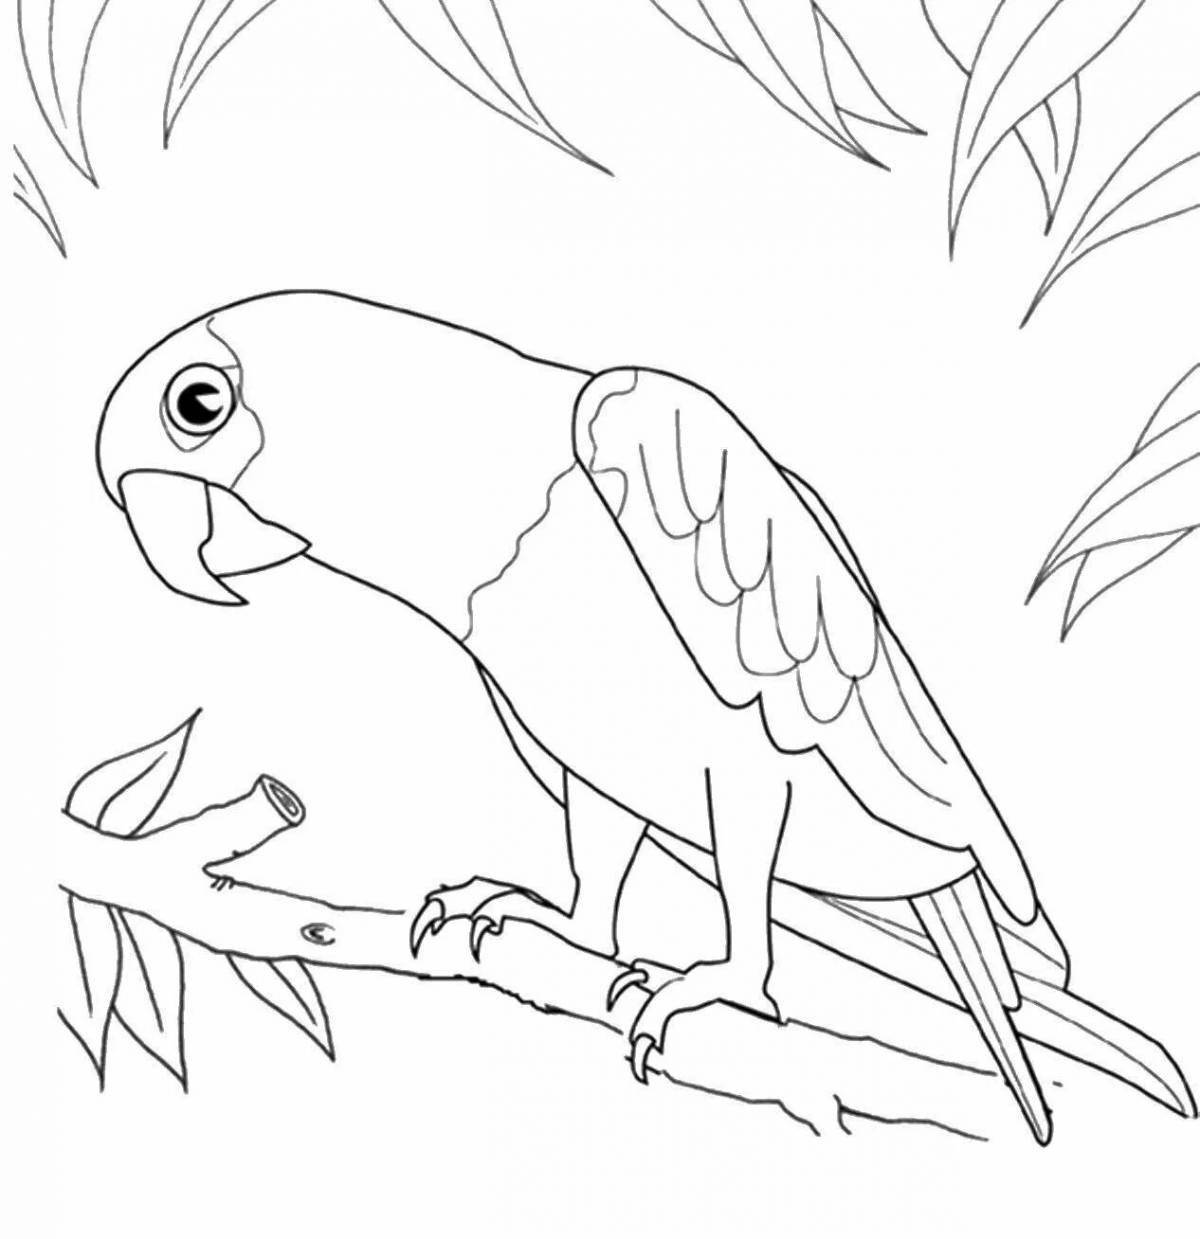 Outstanding parrot coloring book for 6-7 year olds